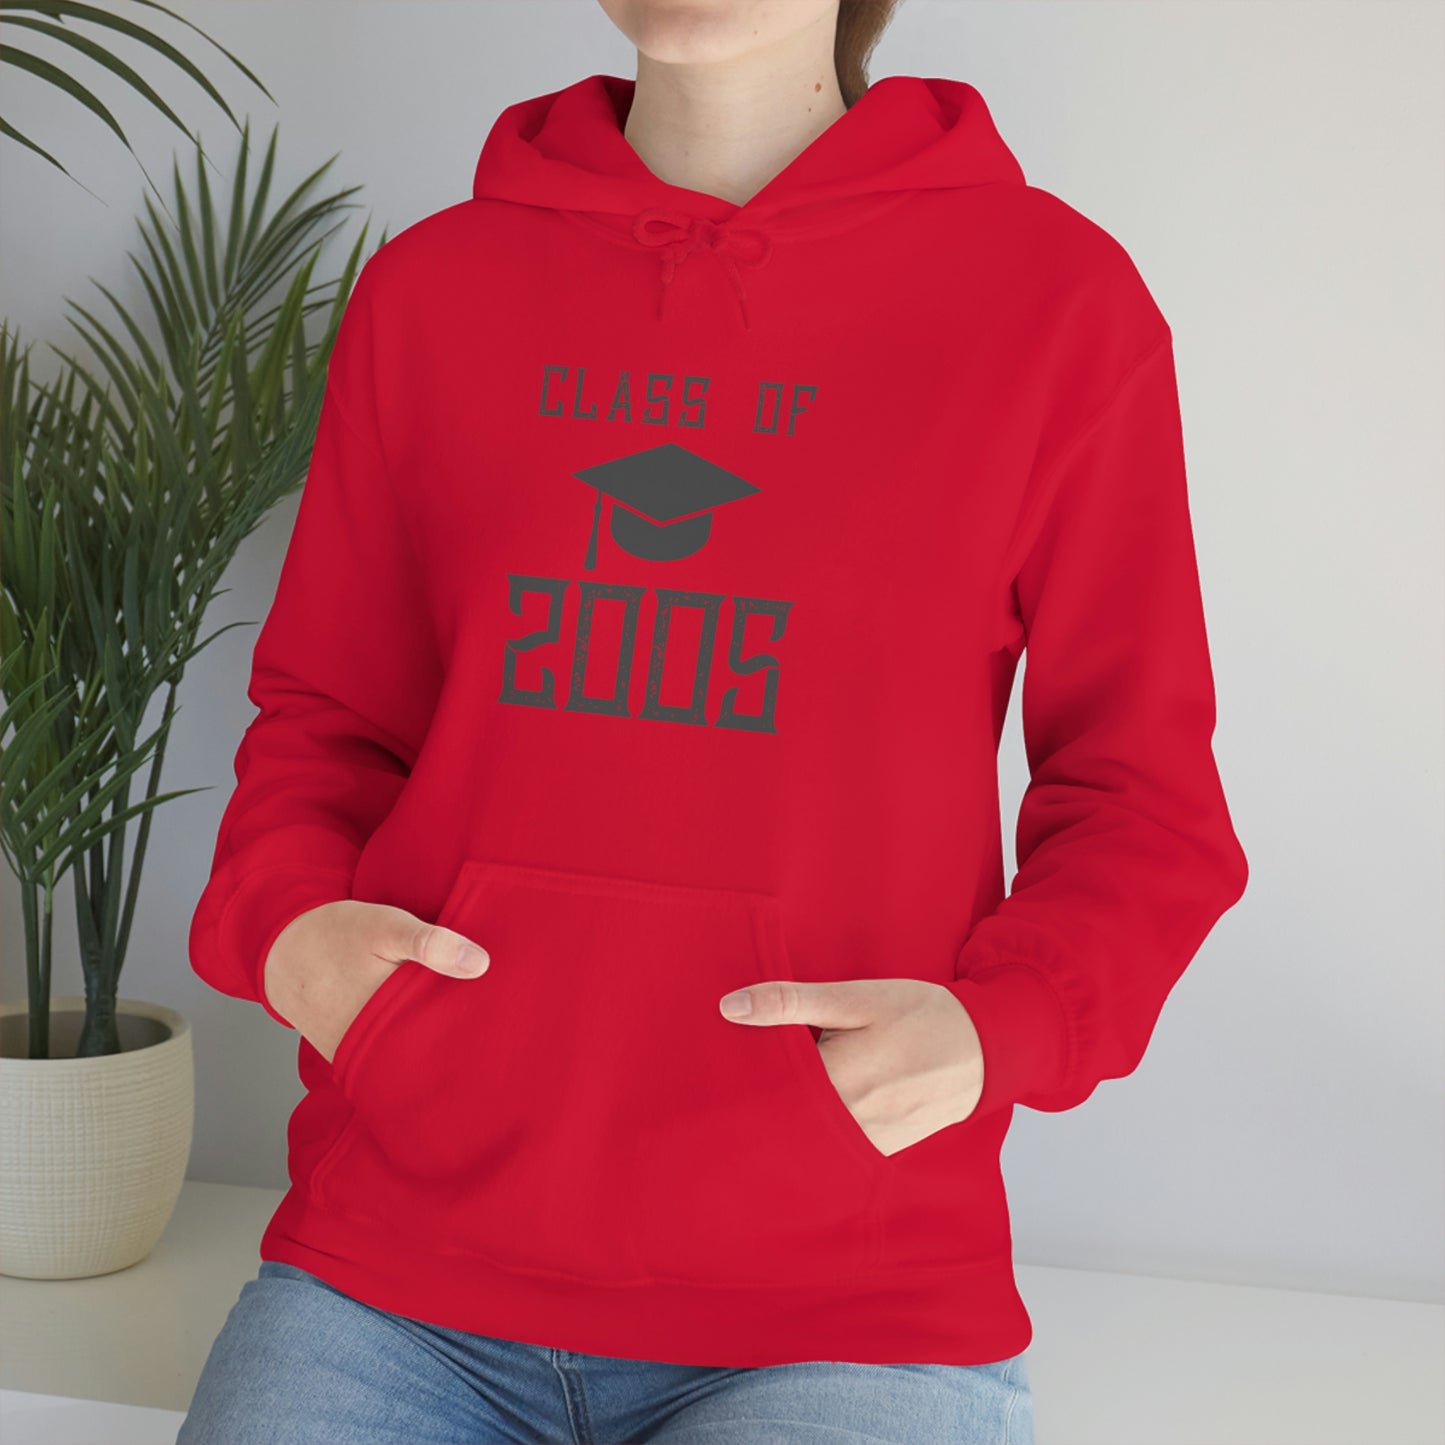 "Class Of 2005" hoodie - Weave Got Gifts - Unique Gifts You Won’t Find Anywhere Else!